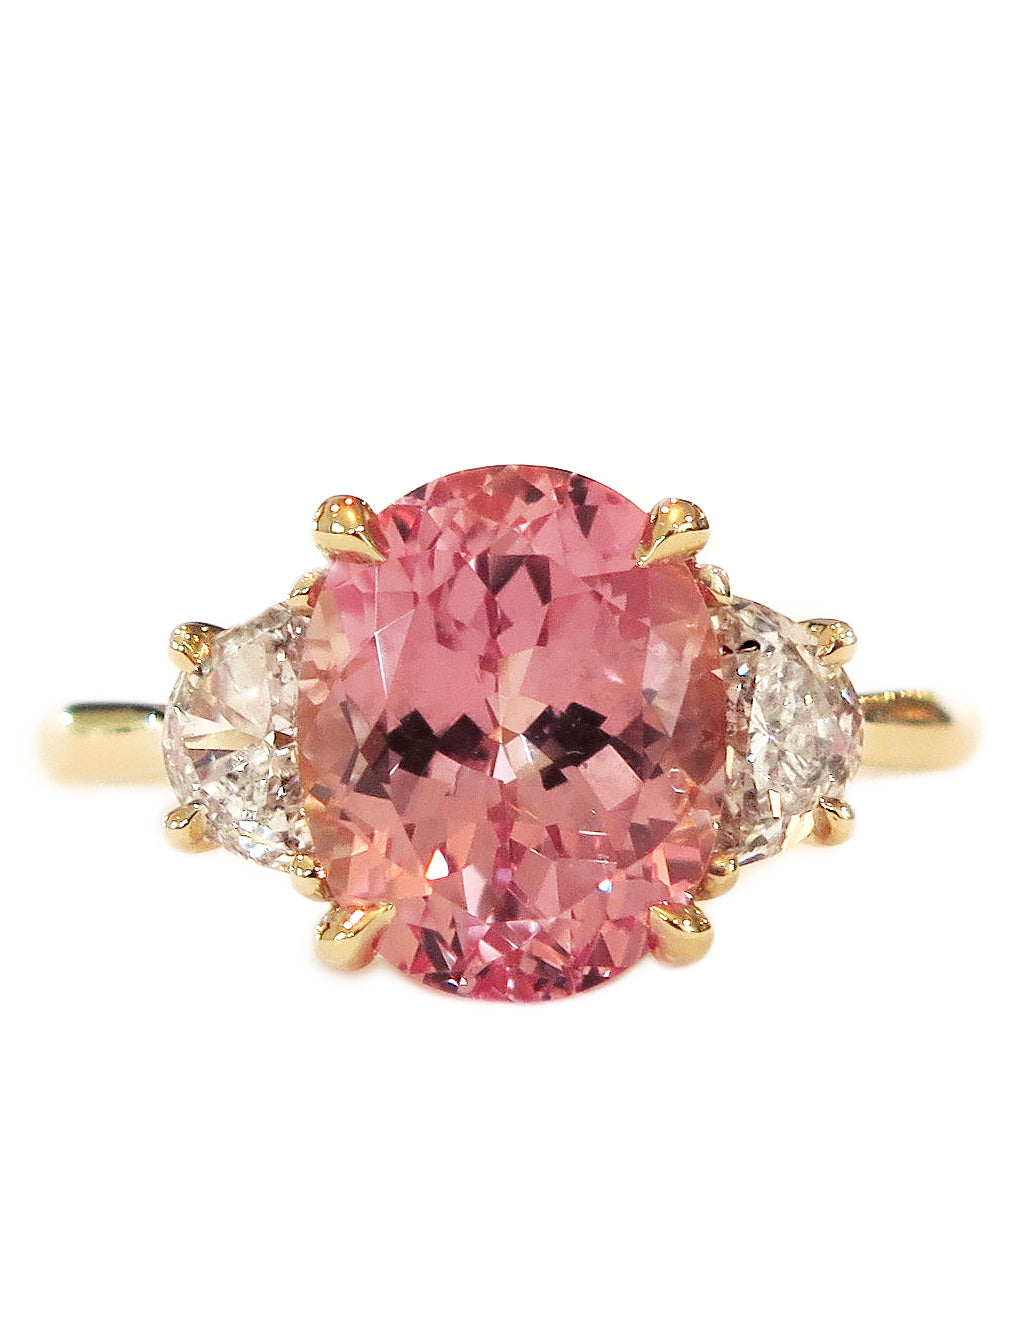 Genuine Pink Sapphire Branch Engagement Ring, Gold Leaves and Diamonds Proposal Ring / Patricia